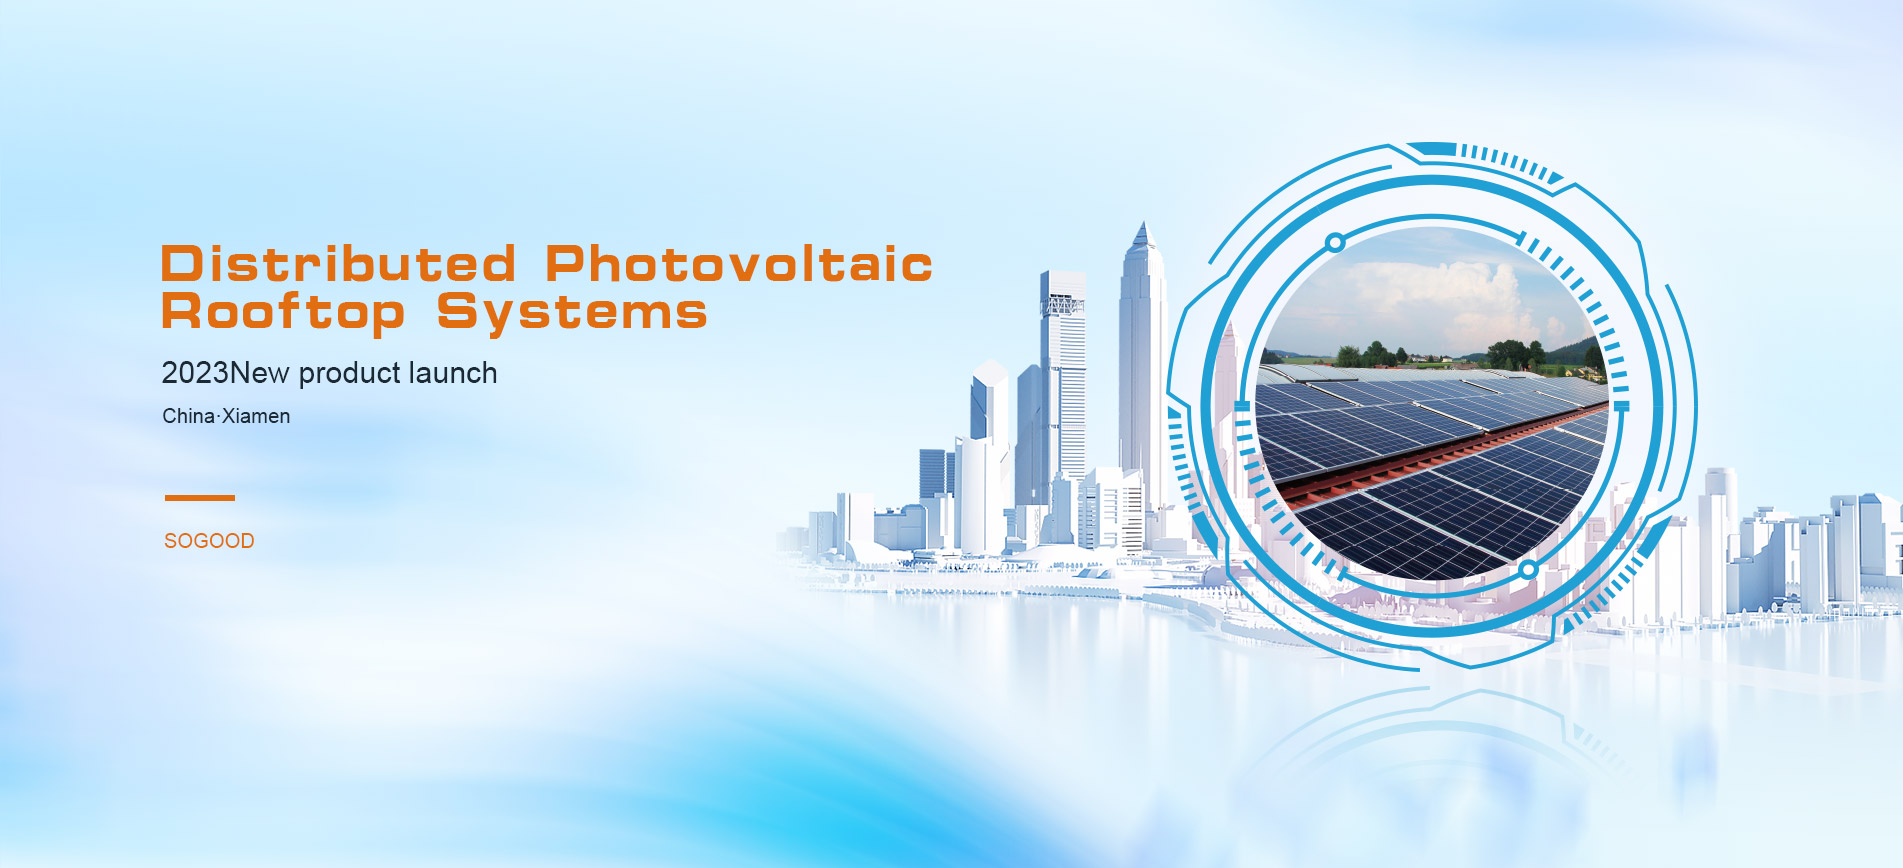 Photovoltaic Rooftop Systems